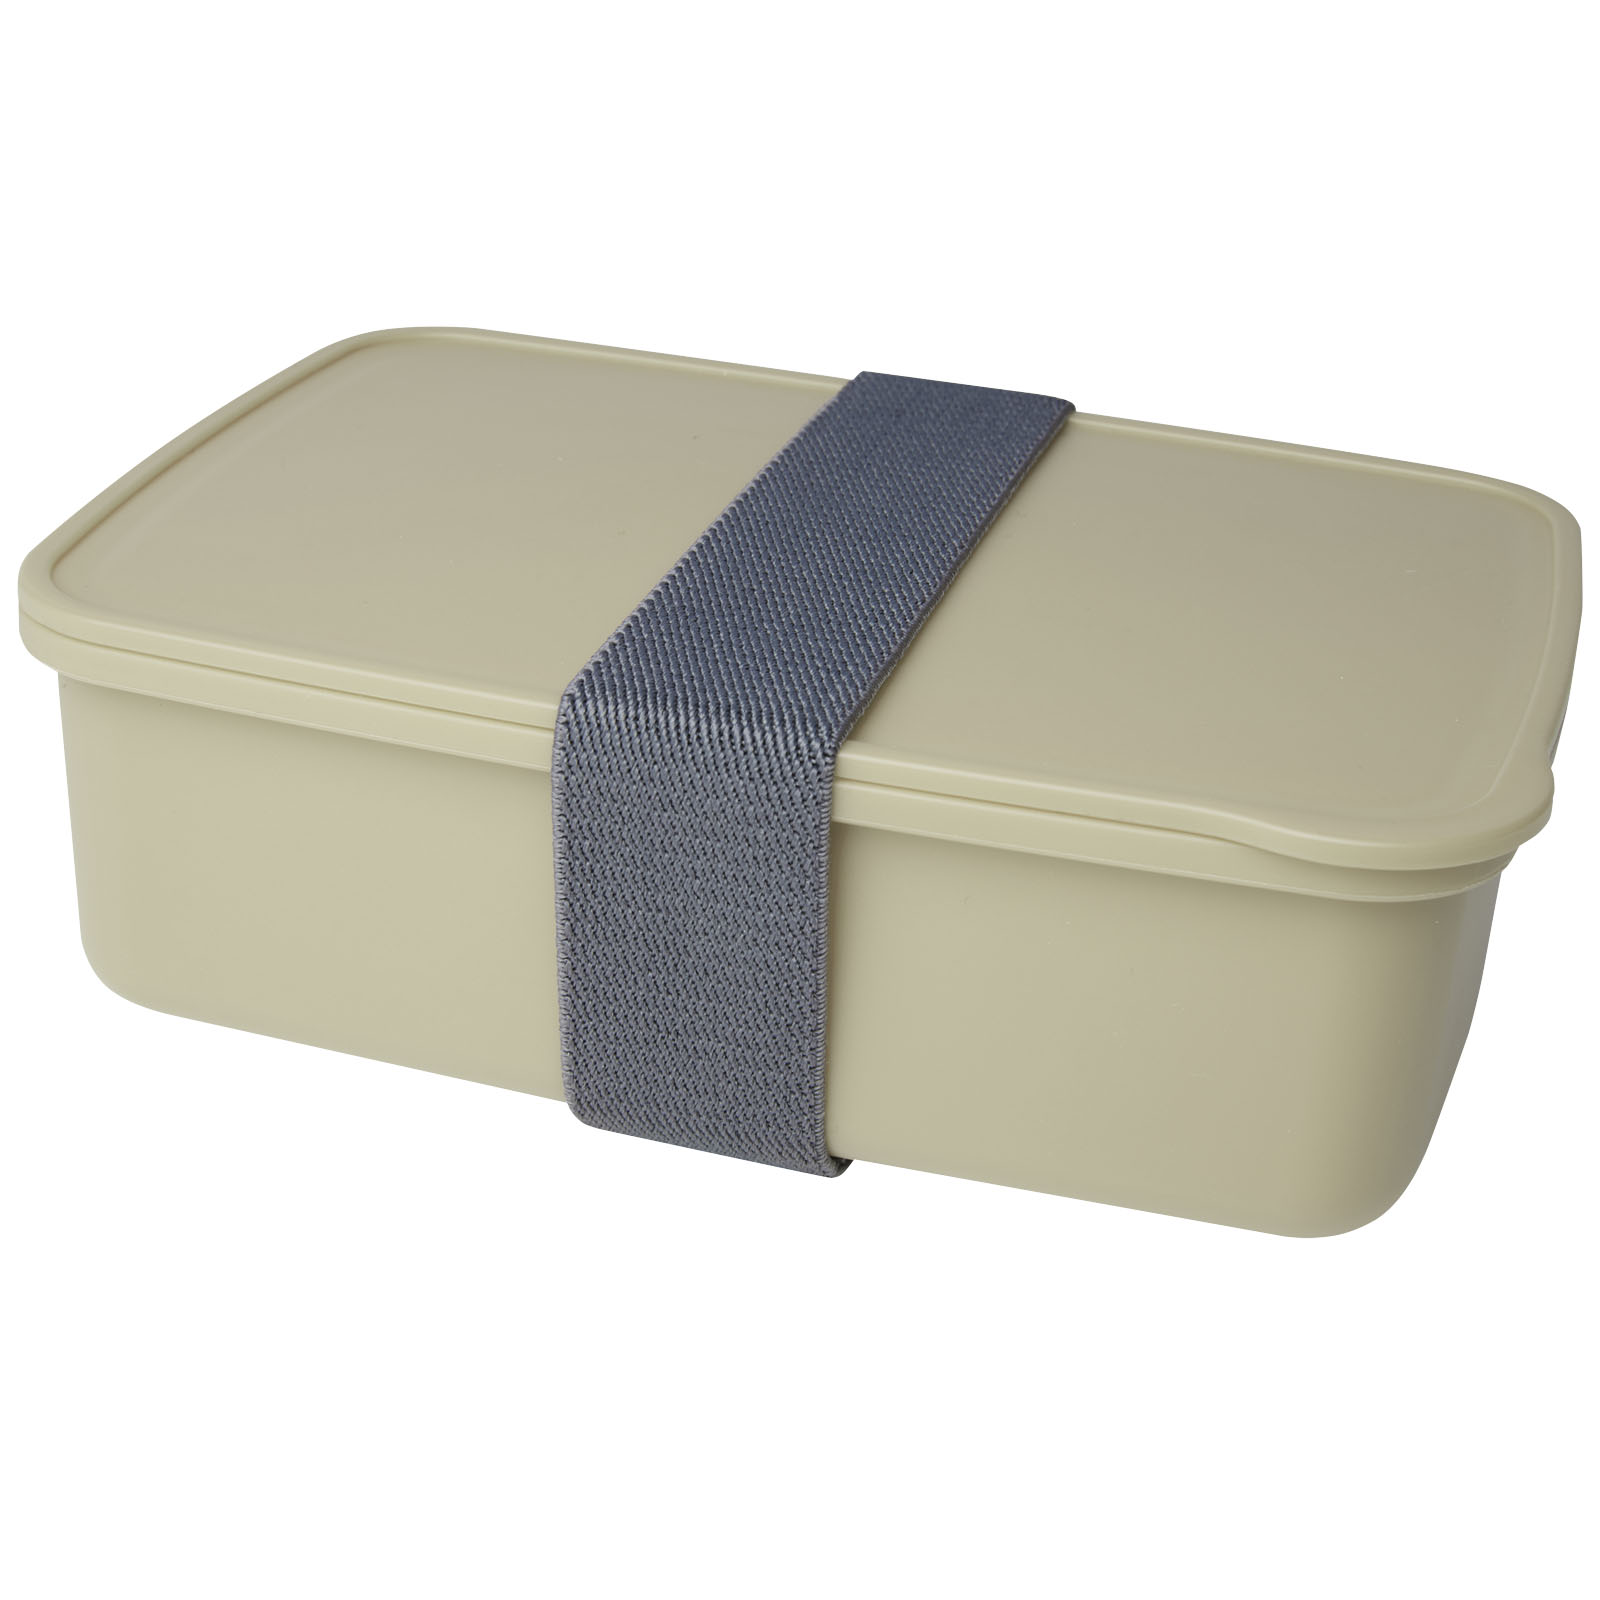 Home & Kitchen - Dovi recycled plastic lunch box